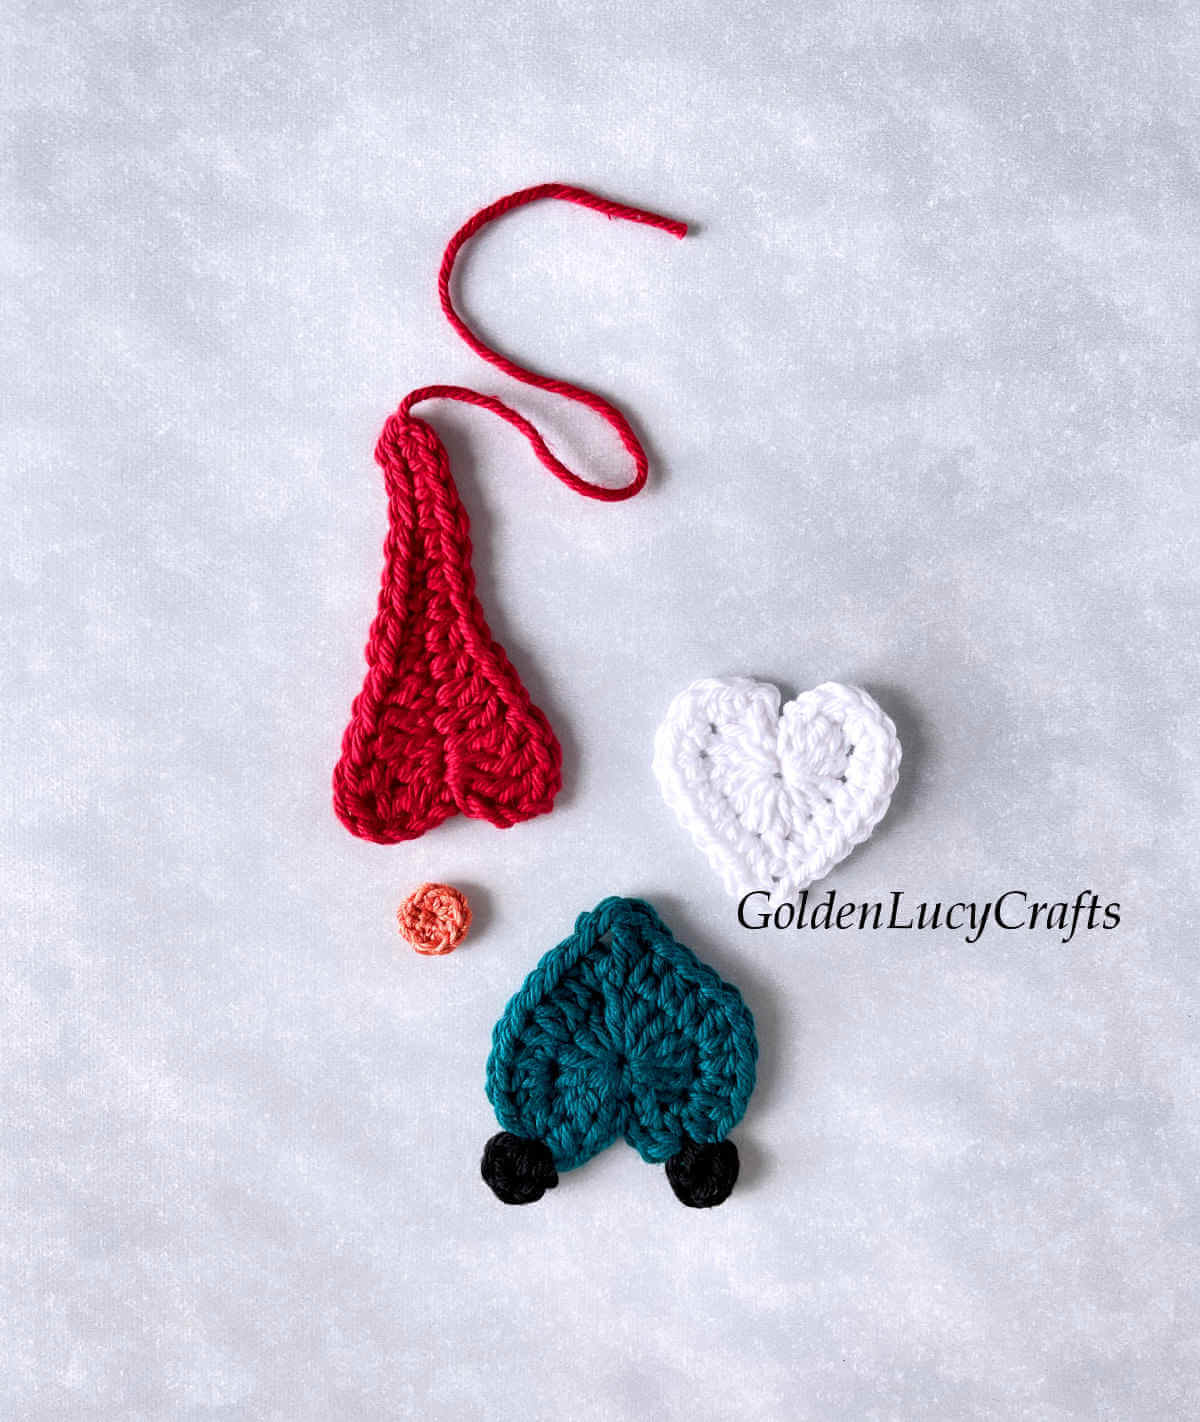 Parts of heart gnome crochet Christmas ornament.